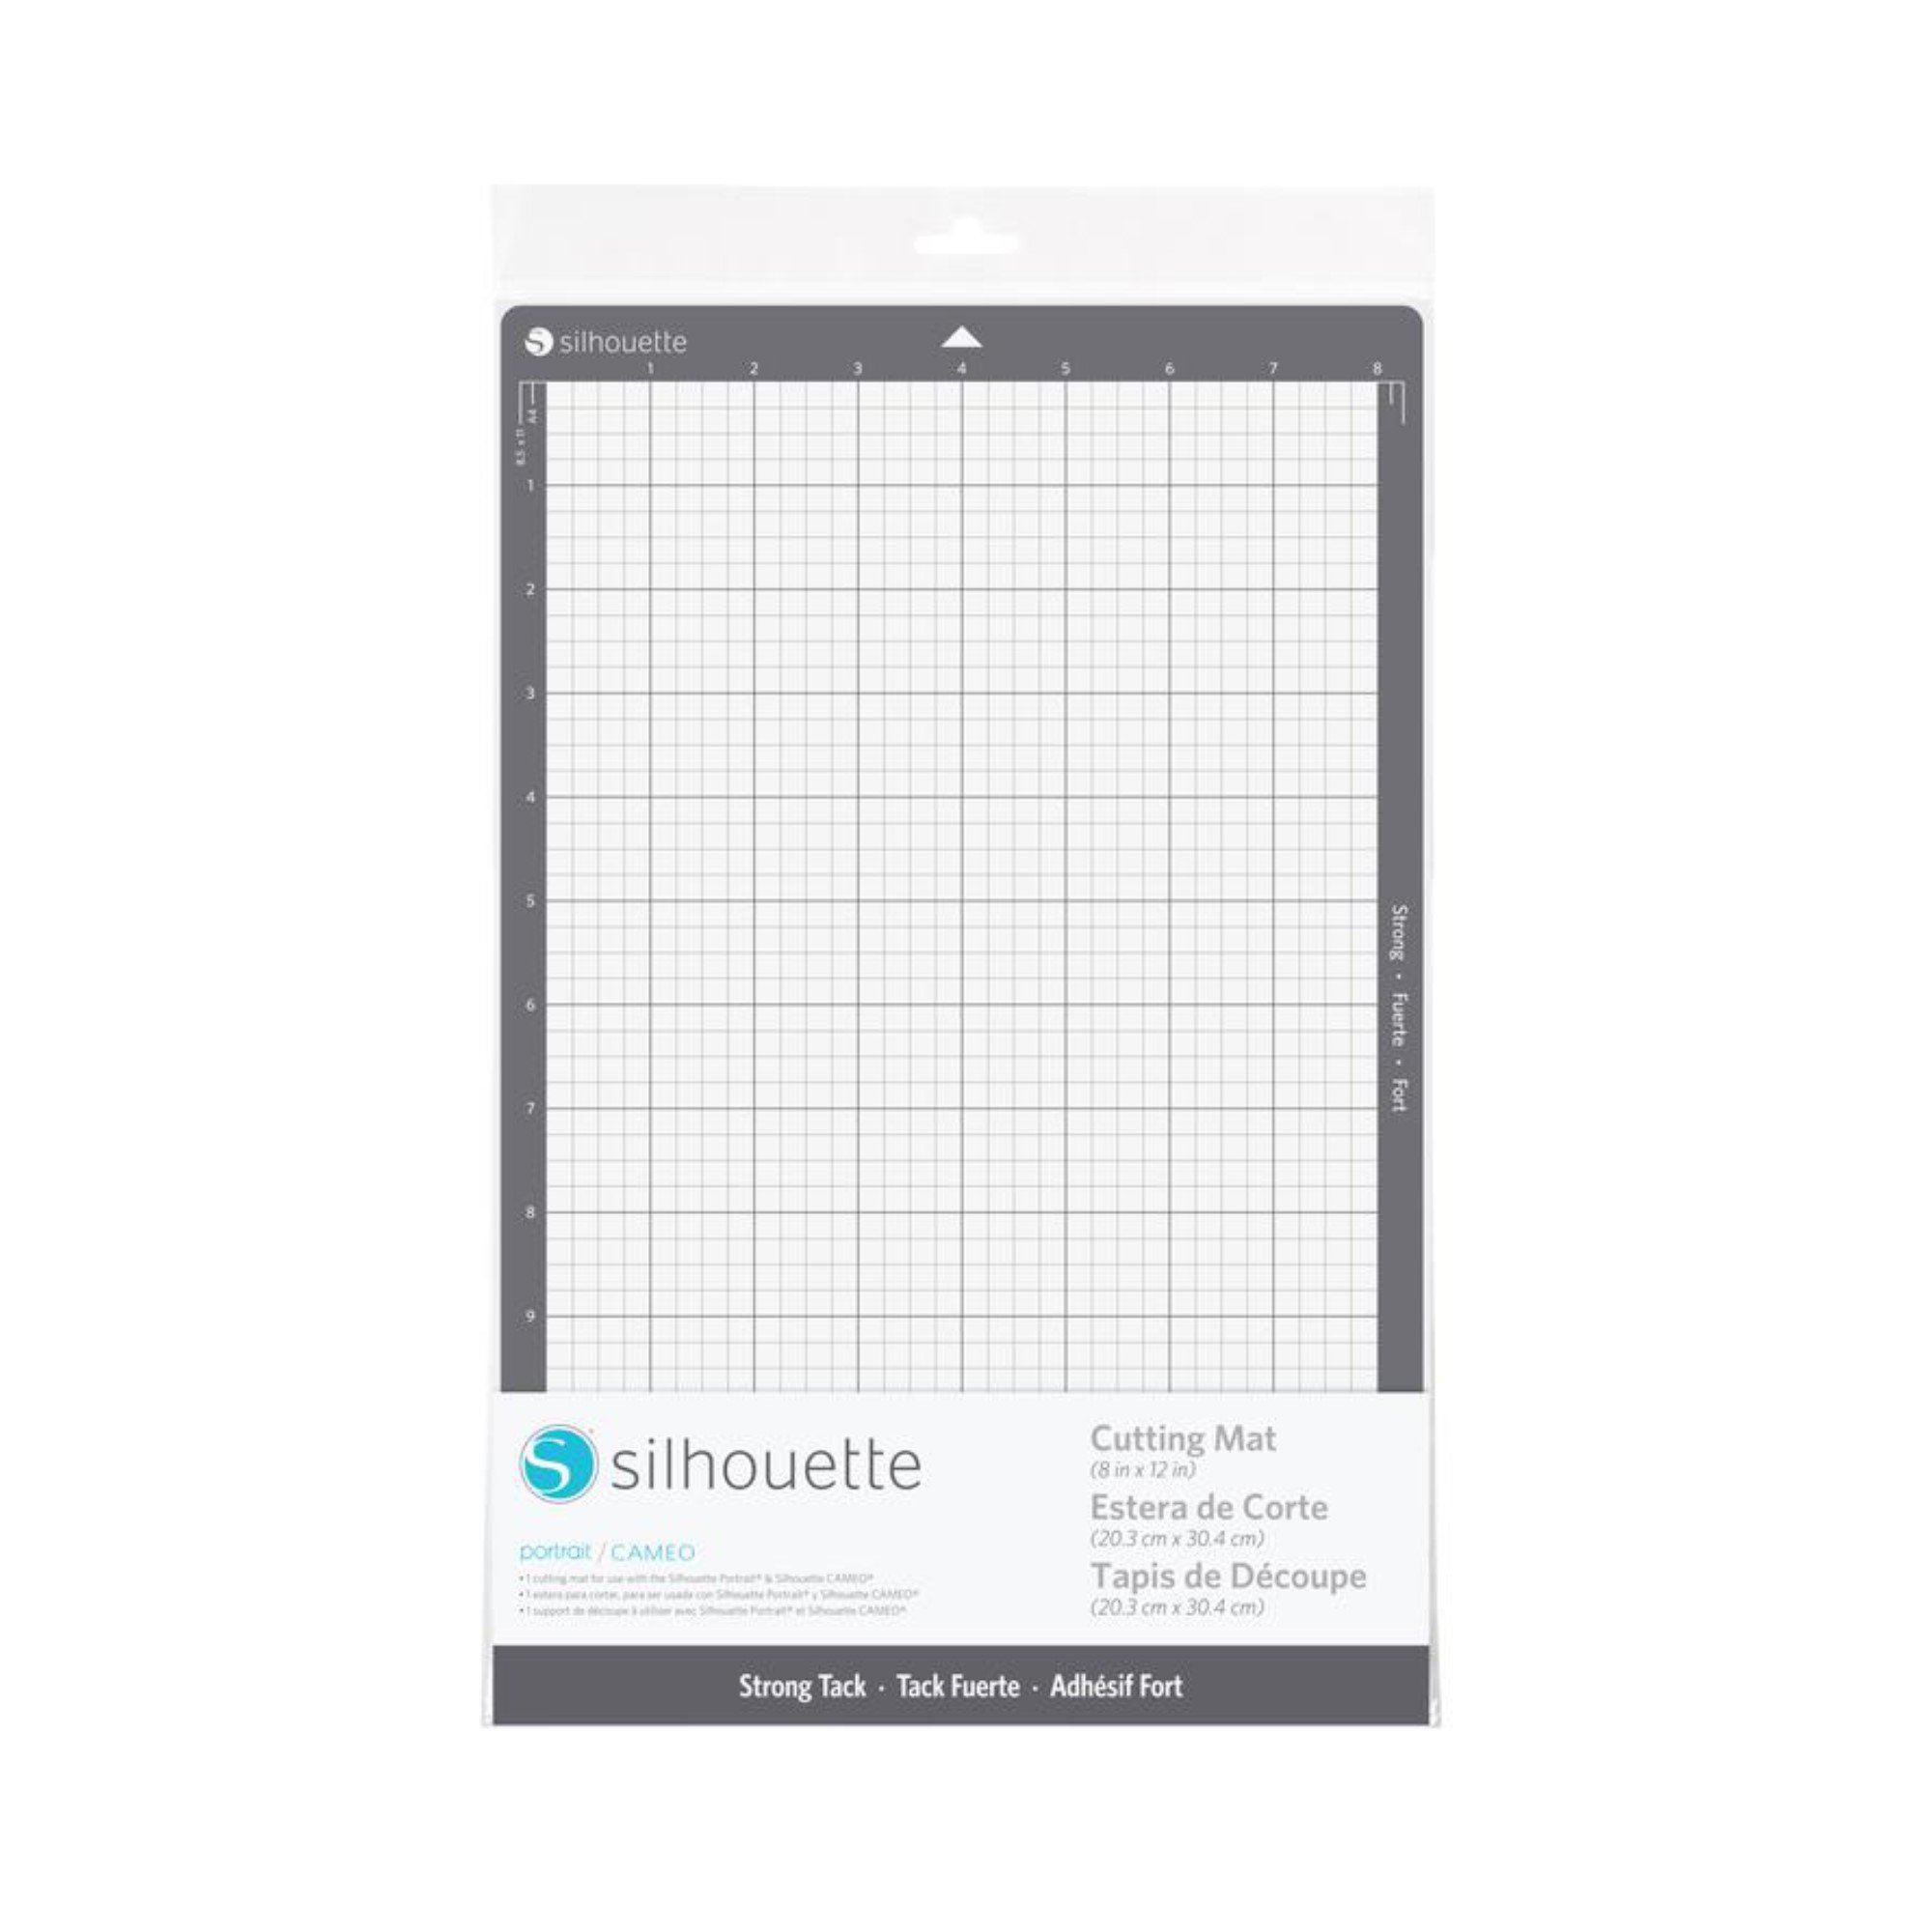 Tips to get the most out of your Silhouette mat – Silhouette